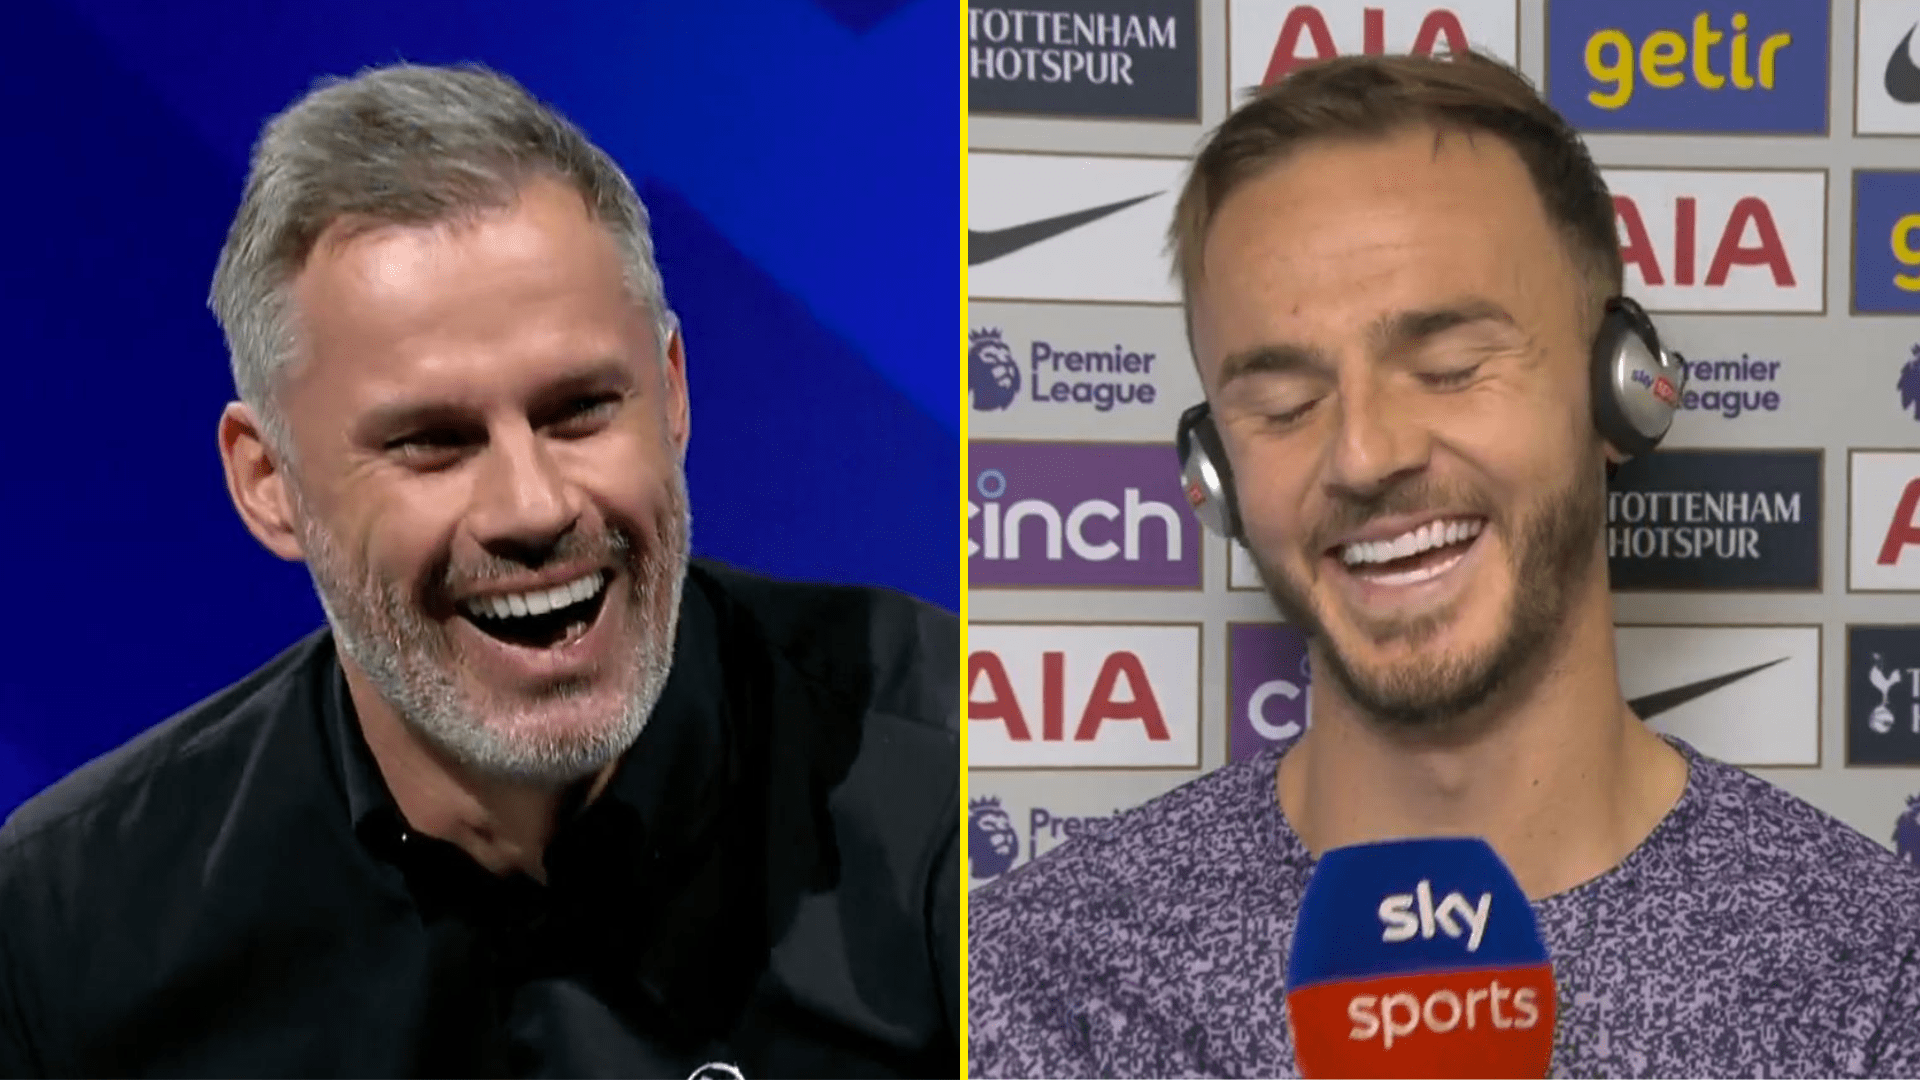 James Maddison can't help but laugh at cheeky question from Jamie Carragher about Liverpool